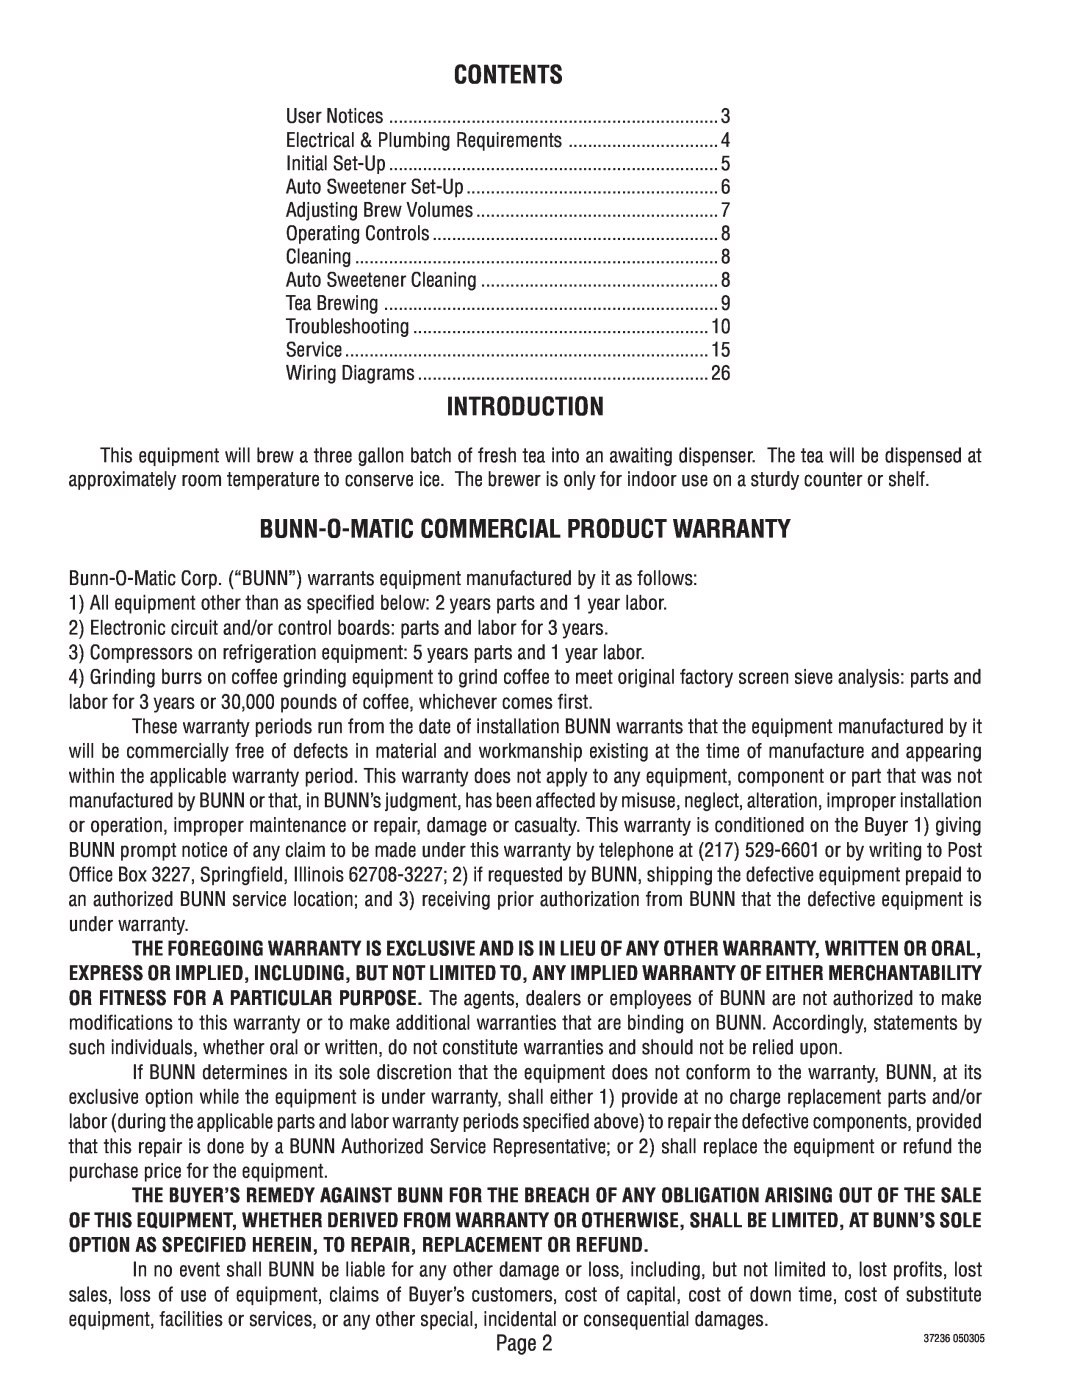 Bunn TB3Q-LP service manual Contents, Introduction, Bunn-O-Matic Commercial Product Warranty, Page 